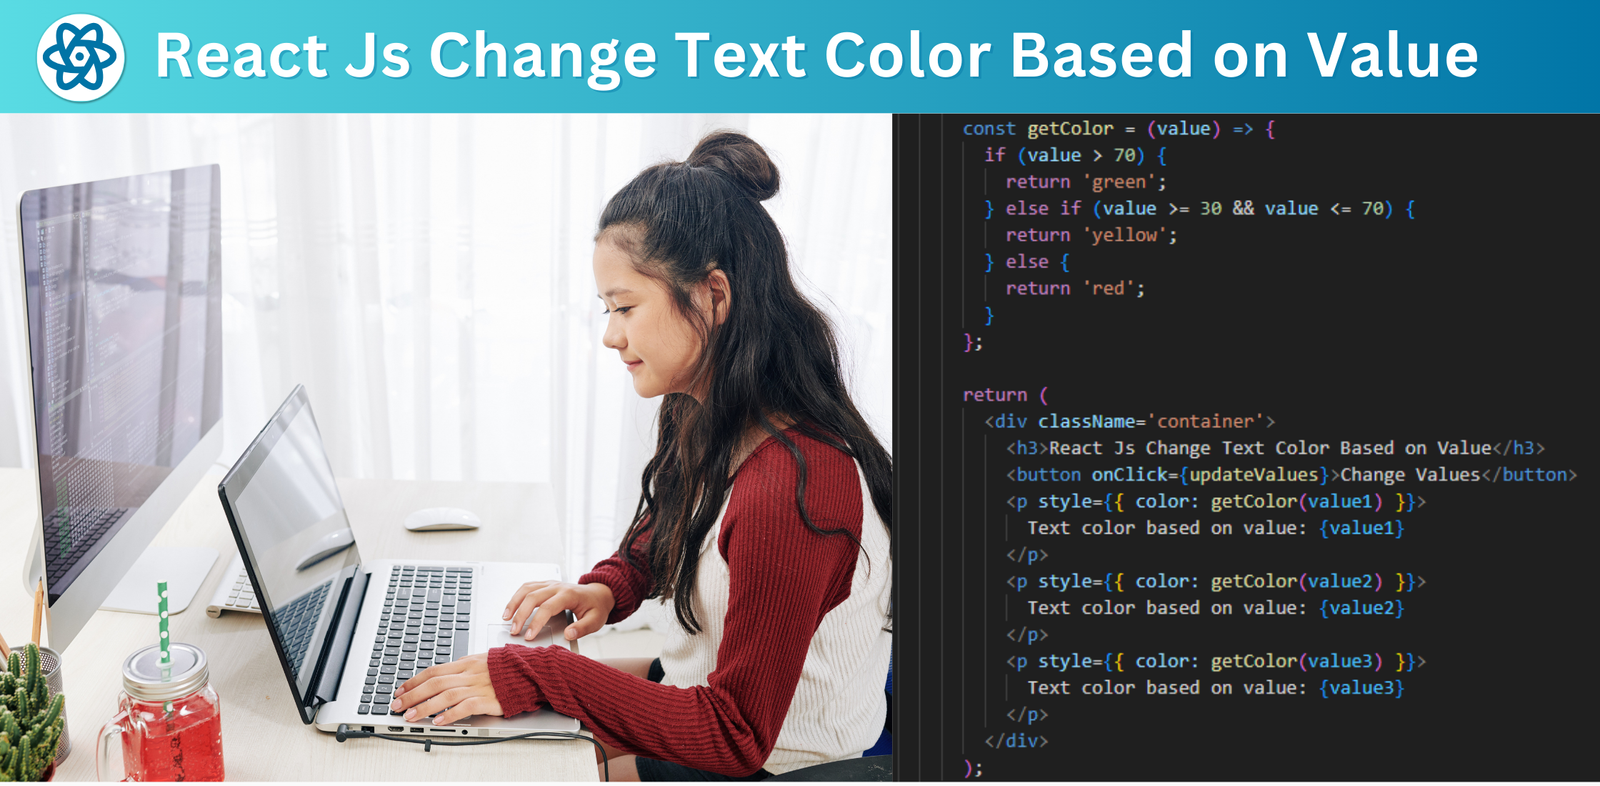 React Js Change Text Color Based on Value